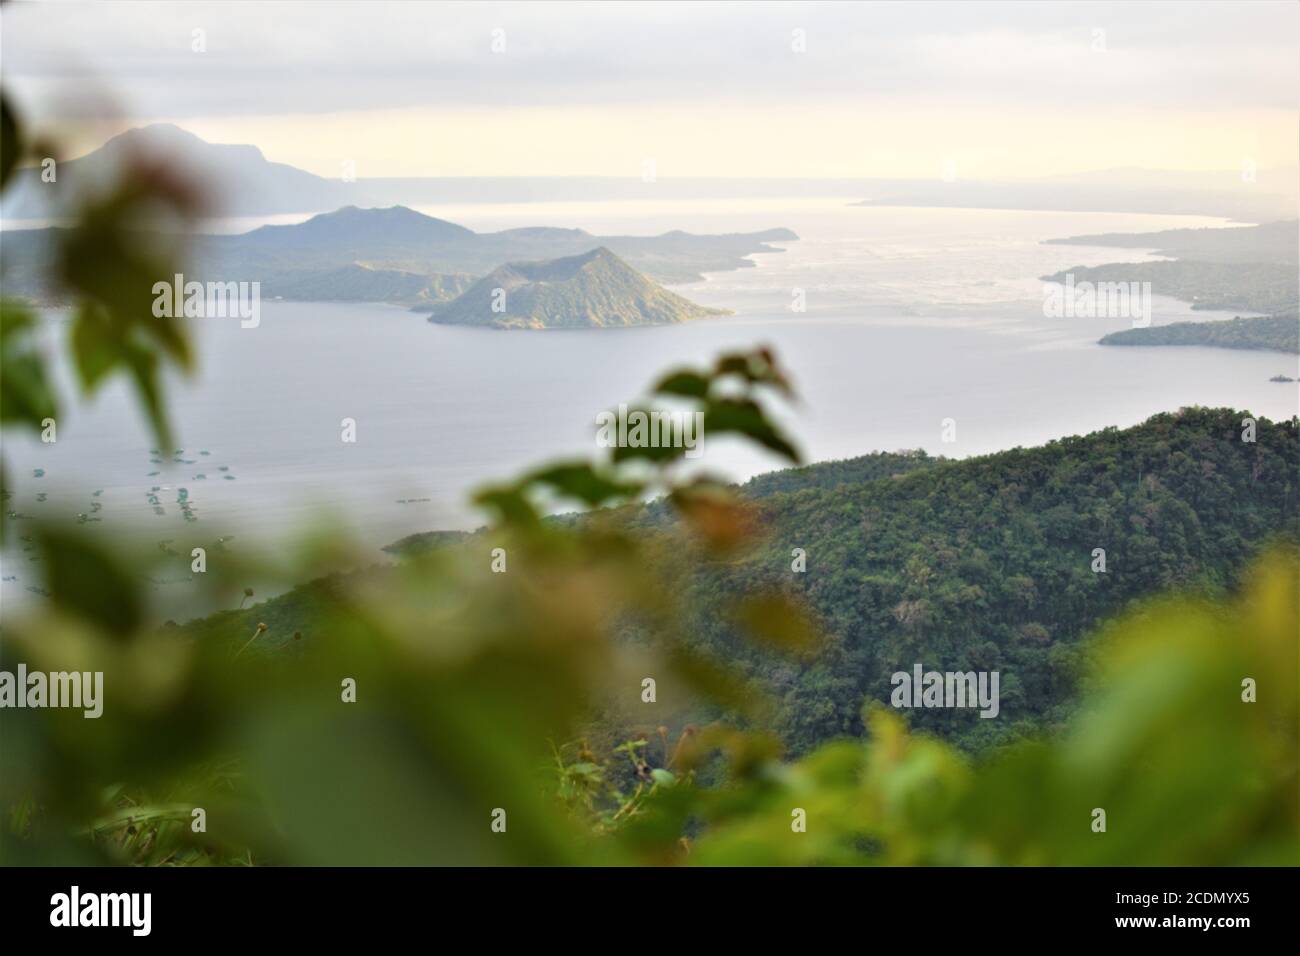 A view of the beautiful volcano island of Taal in the Philippines Stock Photo